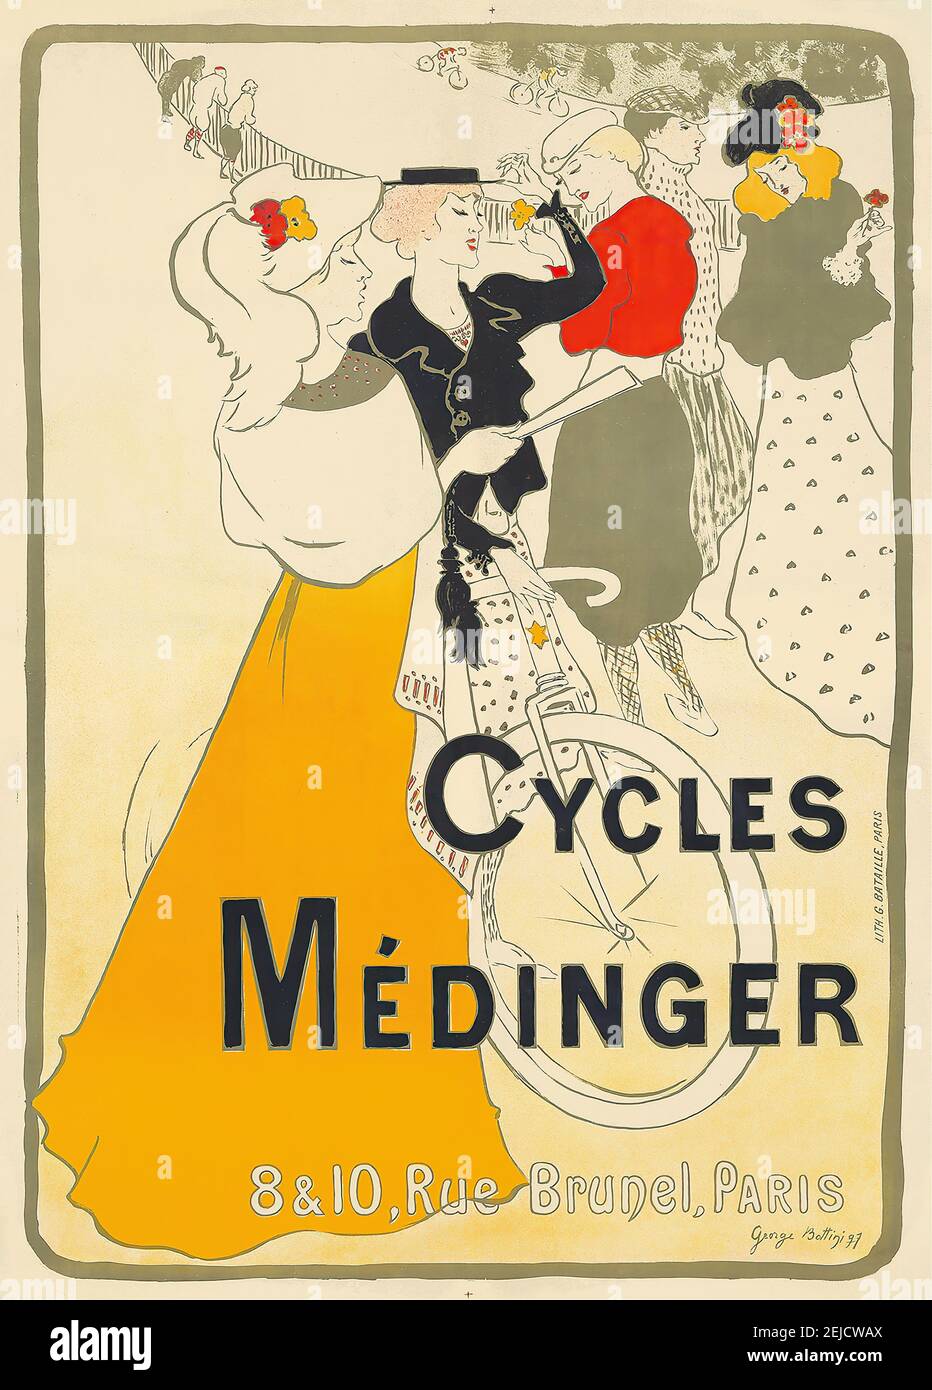 Cycles Médinger. Museum: PRIVATE SAMMLUNG. Autor: Georges Alfred Bottini. Stockfoto